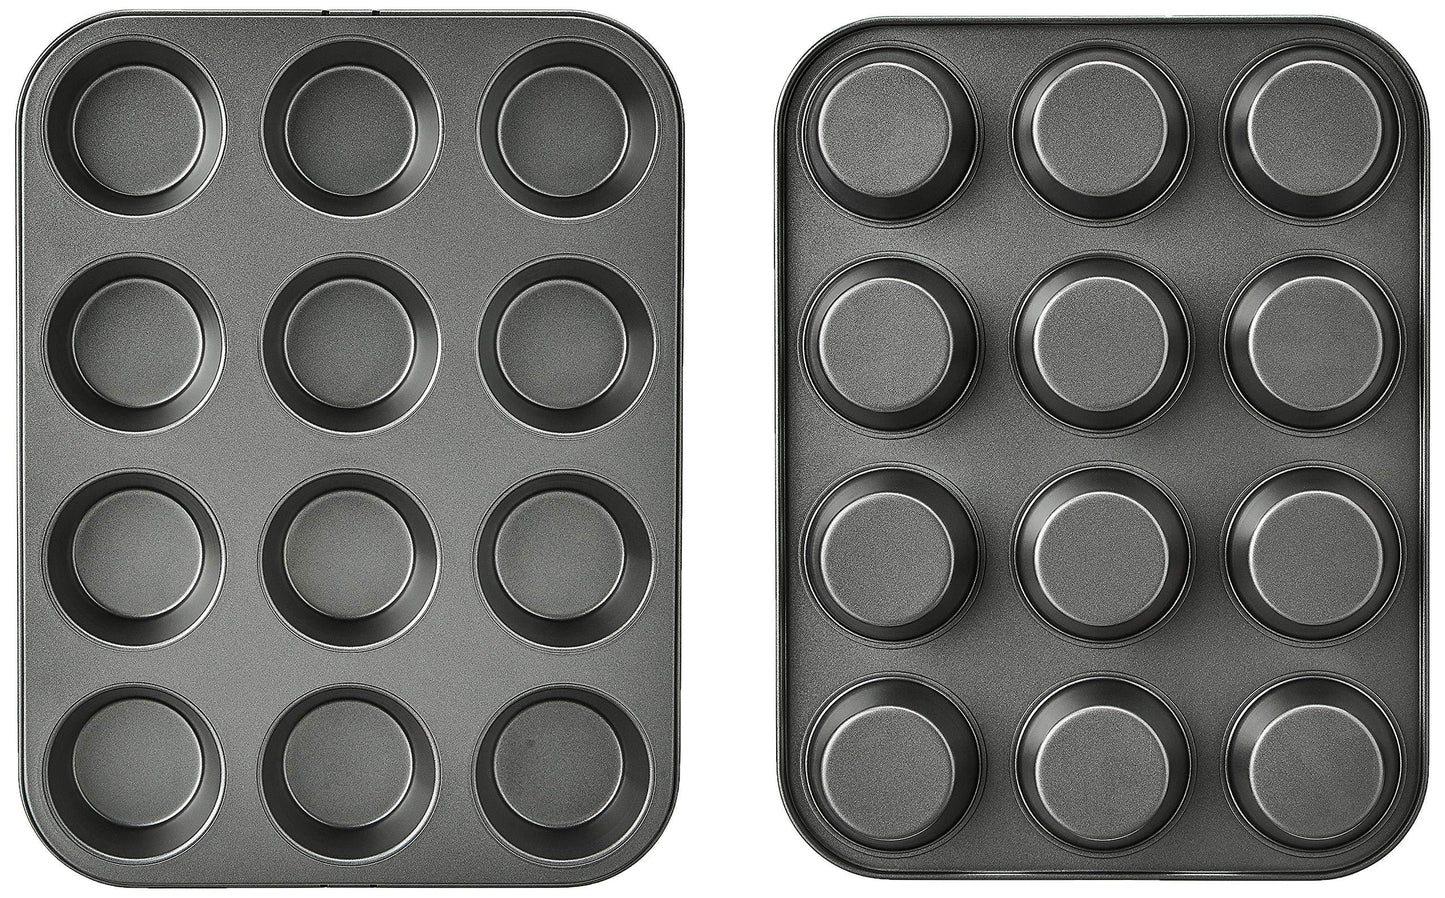 Amazon Basics Nonstick Round Muffin Baking Pan, 12 Cups, Set of 2, Gray, 13.9x10.55x1.22" - CookCave